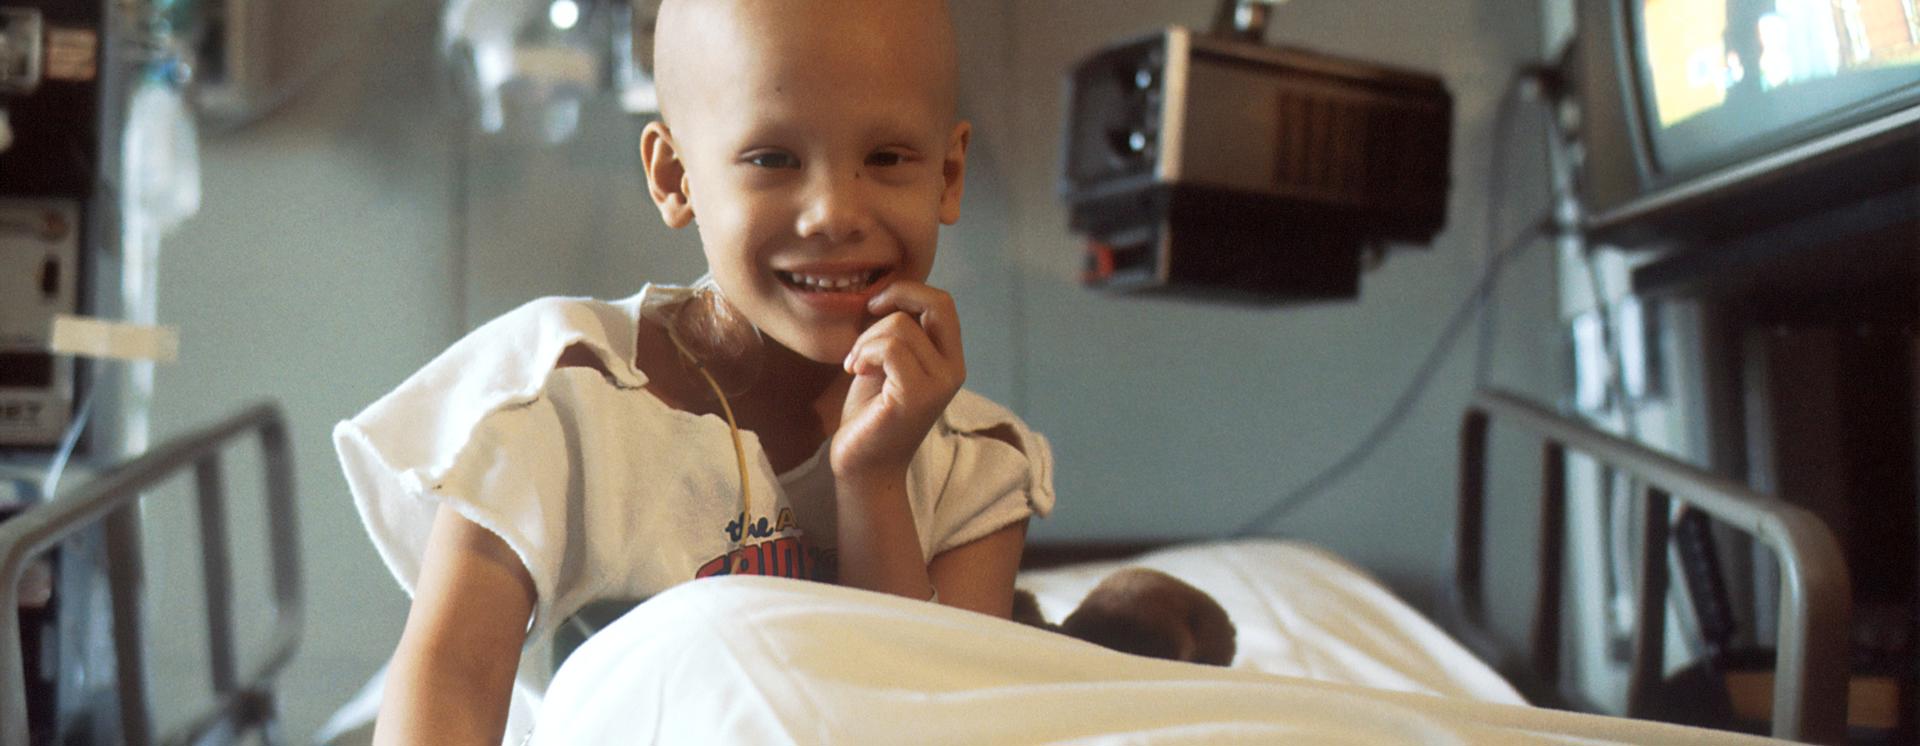 A child sat in a hospital bed smiling at the camera wearing a hospital gown and with medical equipment around them